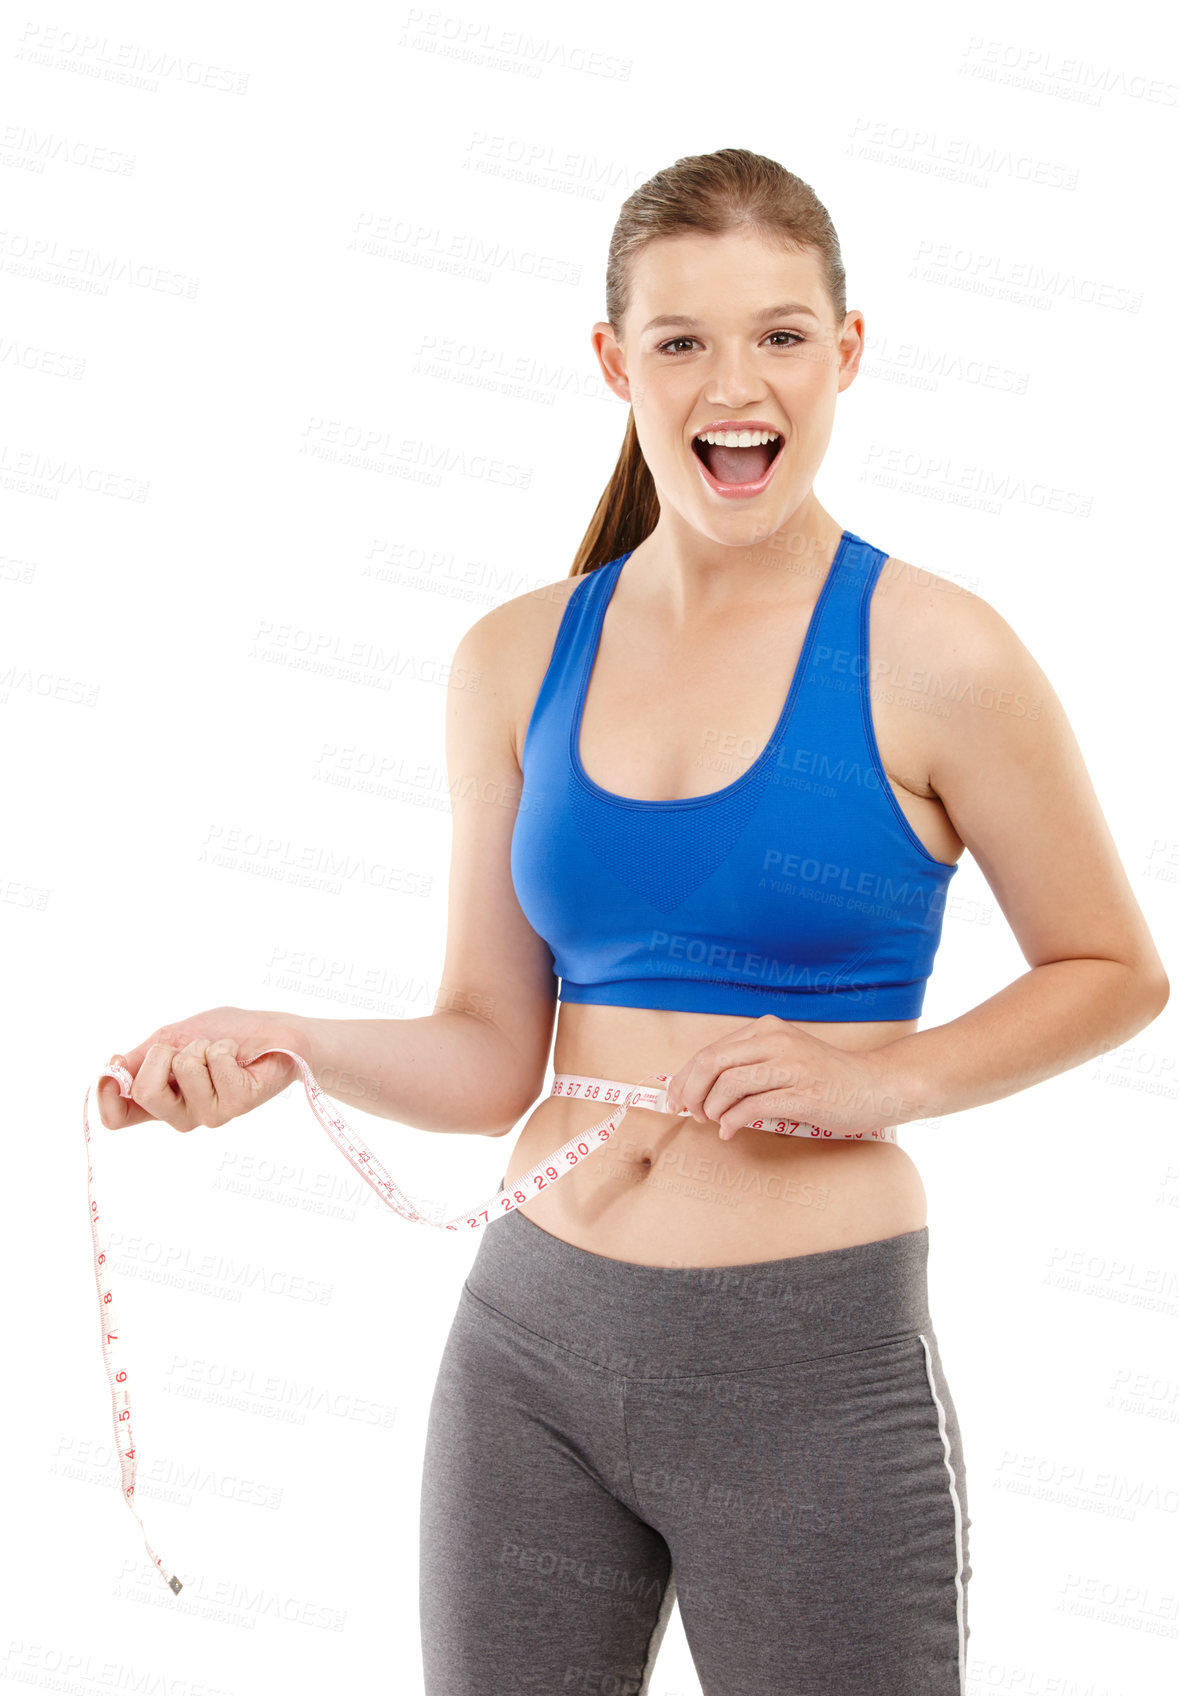 Buy stock photo A pretty teenage girl measuring her waistline and looking happy